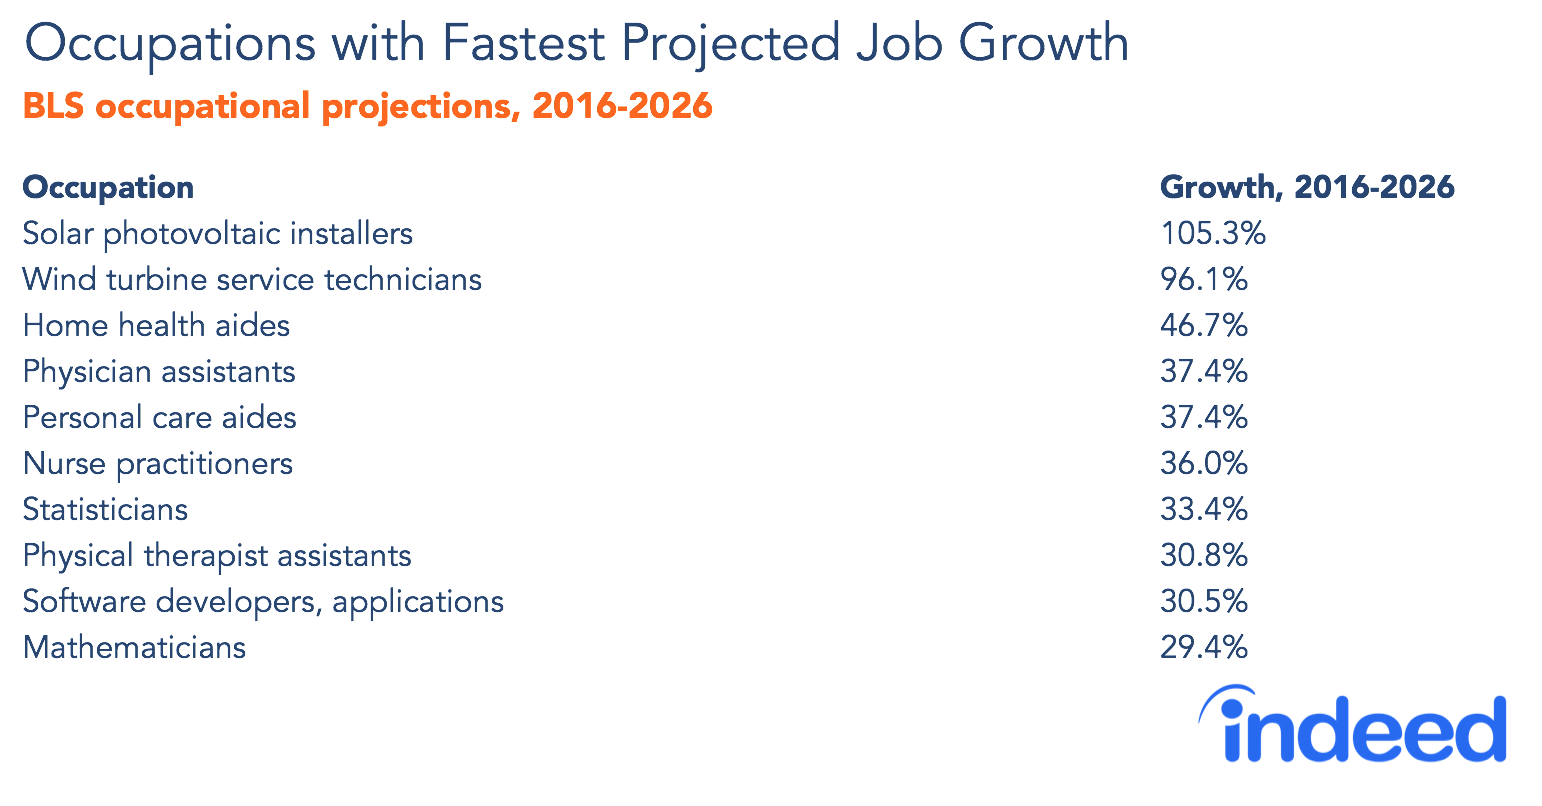 Occupations with fastest projected job growth